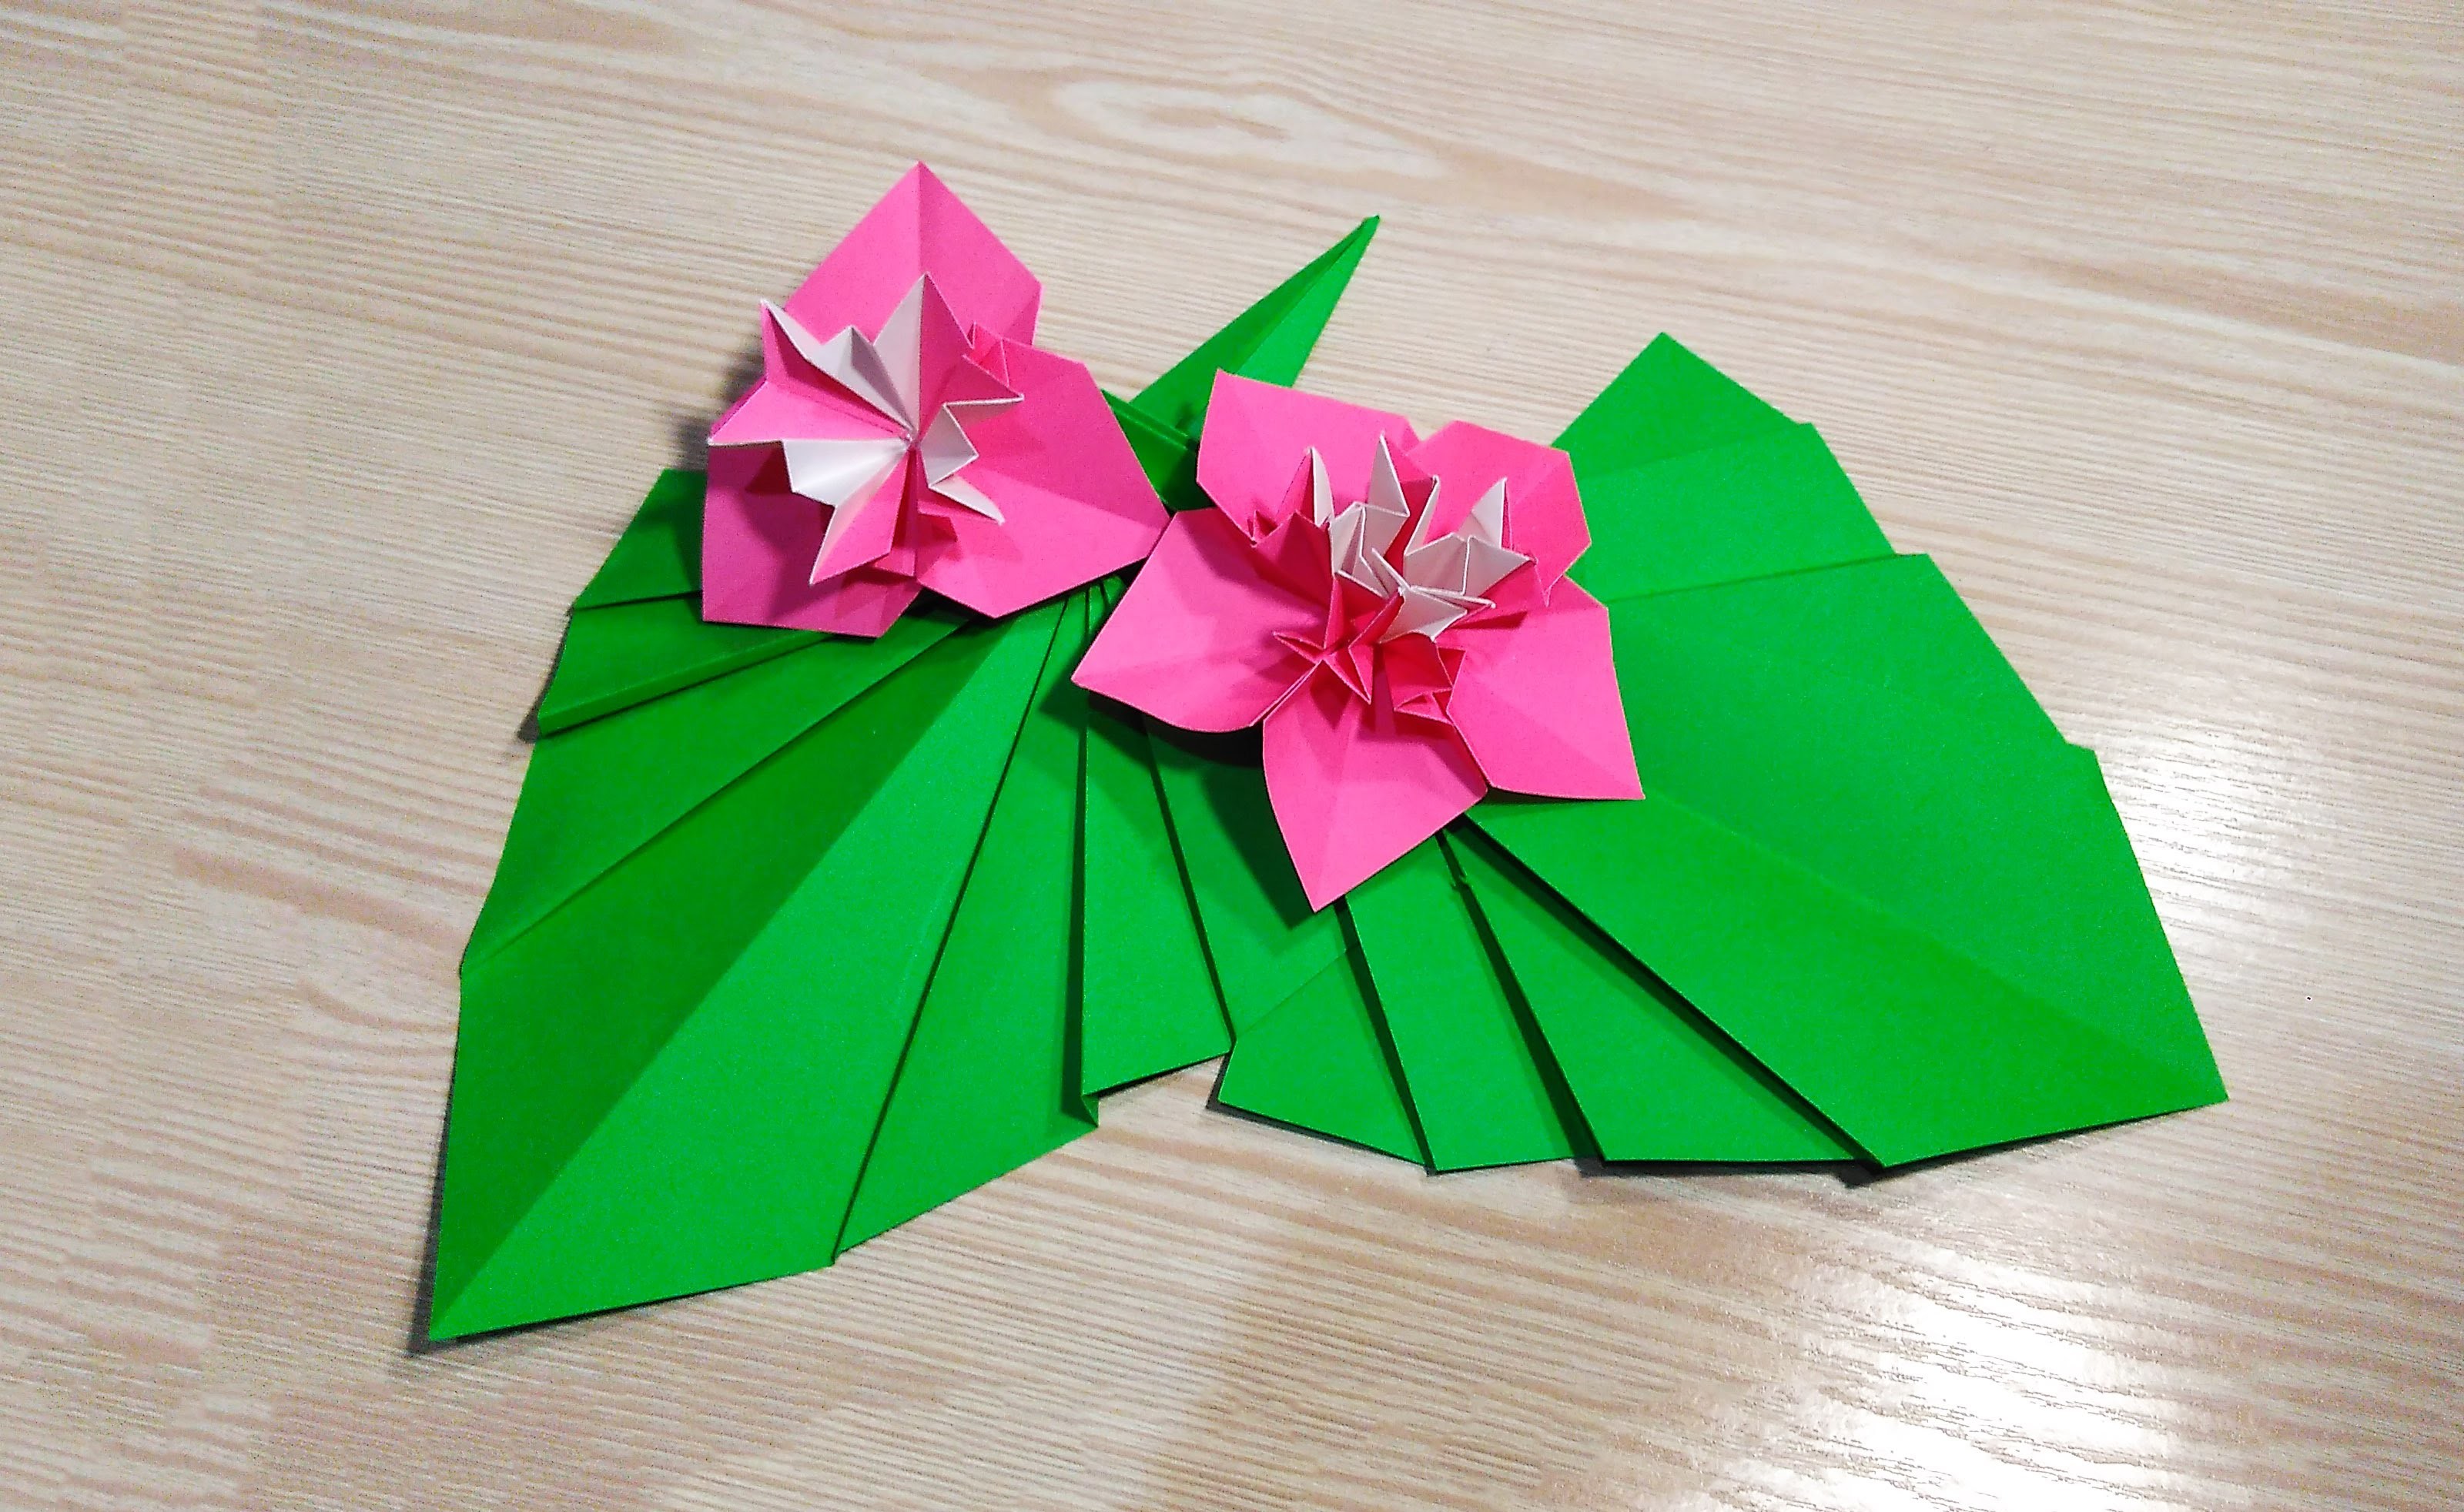  Origami  leaf  for decor Easy  way to decorate your room 